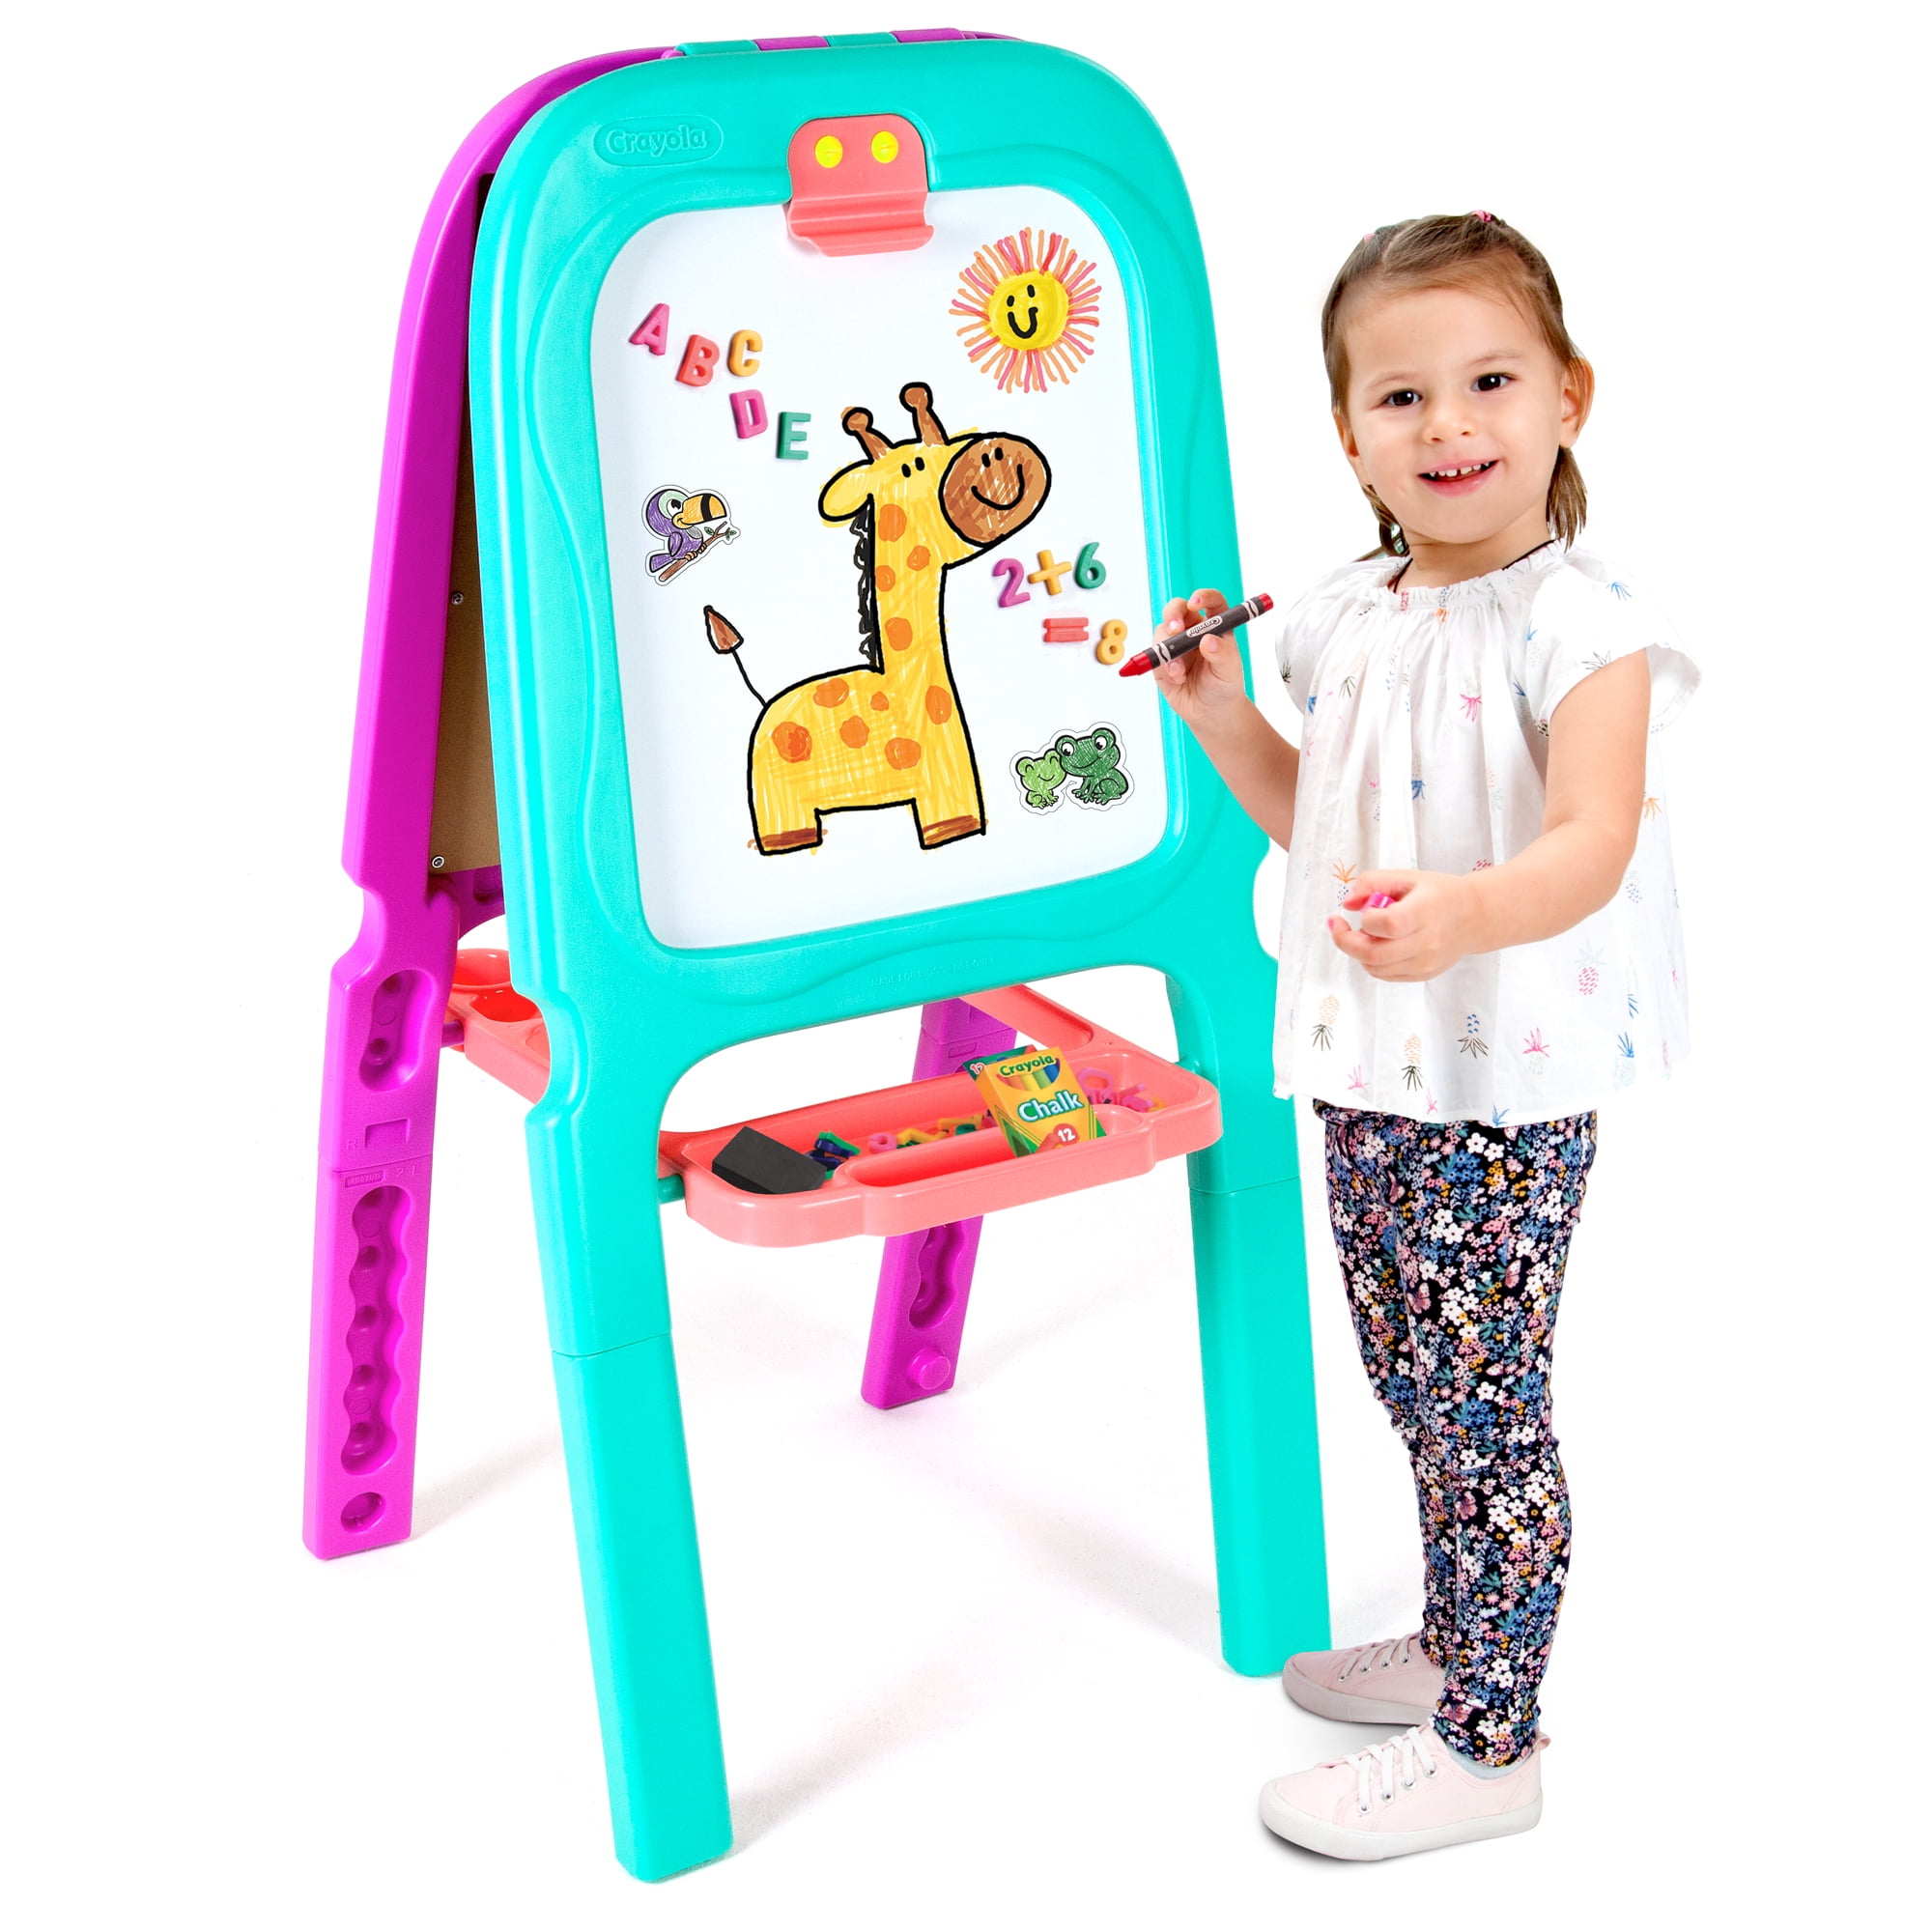 PAW Patrol Activity Easel with Storage Delta Children Play Toddler New Nick Jr 